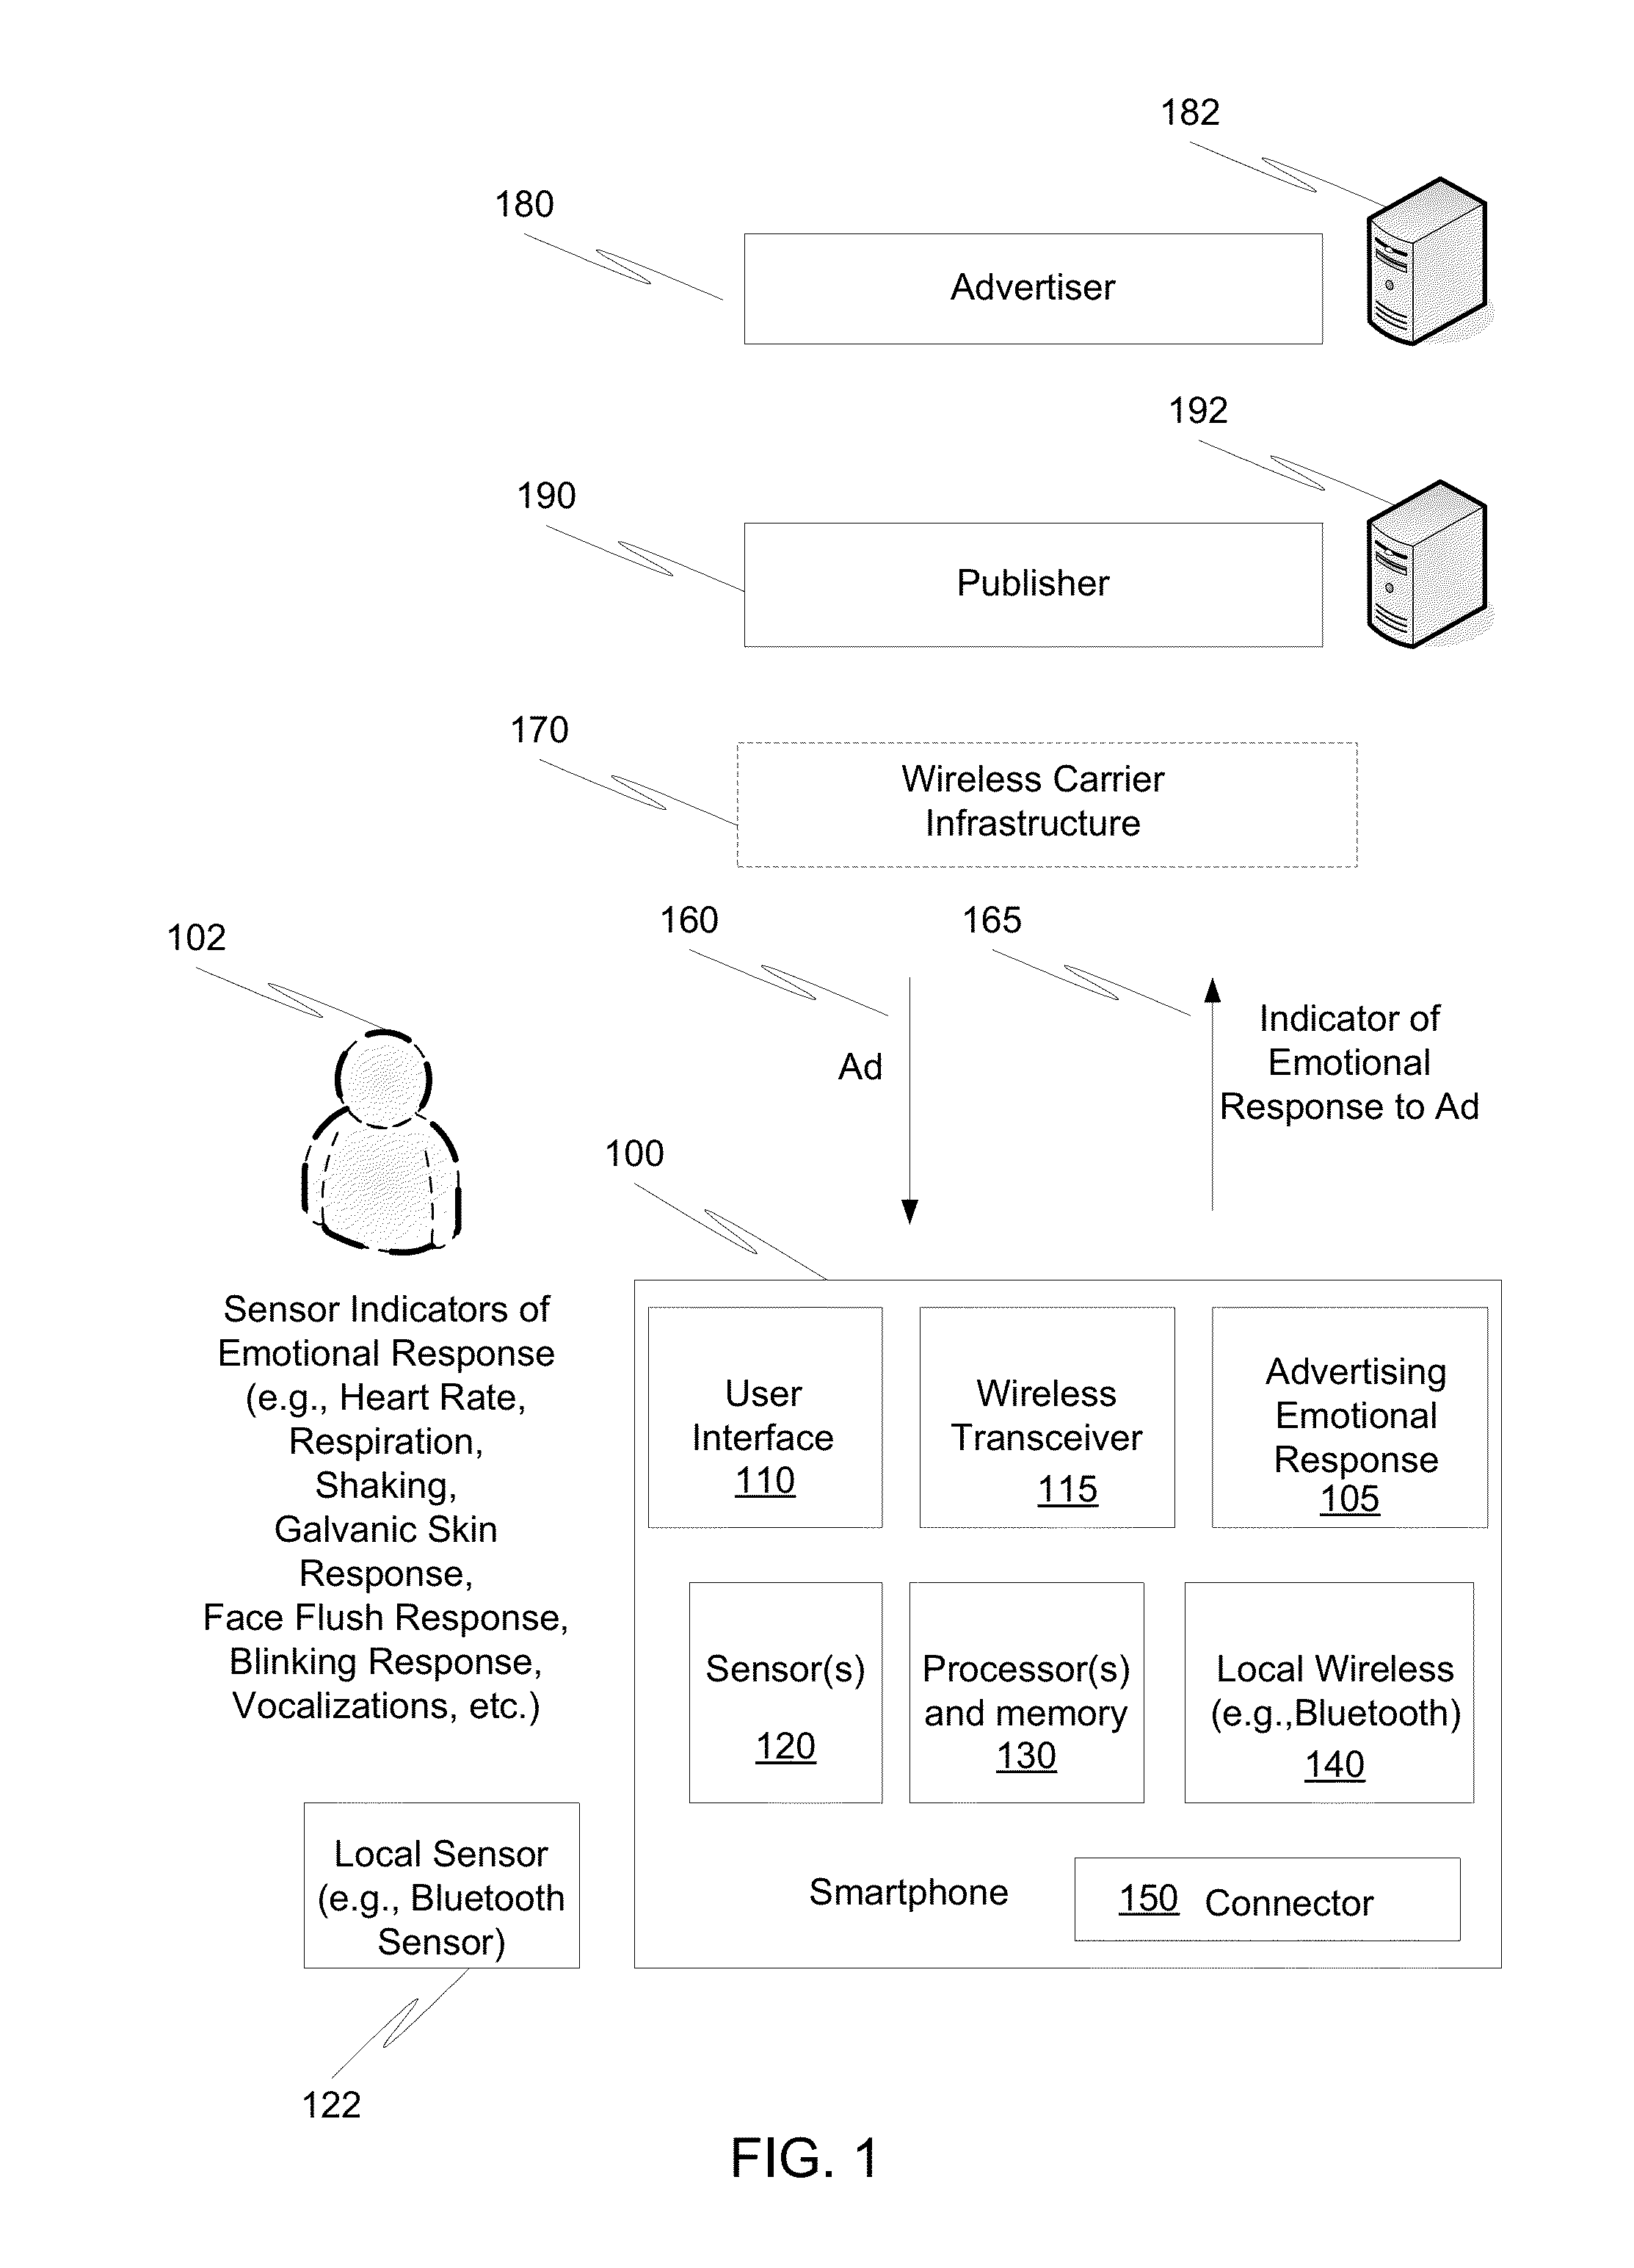 System and method to record, interpret, and collect mobile advertising feedback through mobile handset sensory input